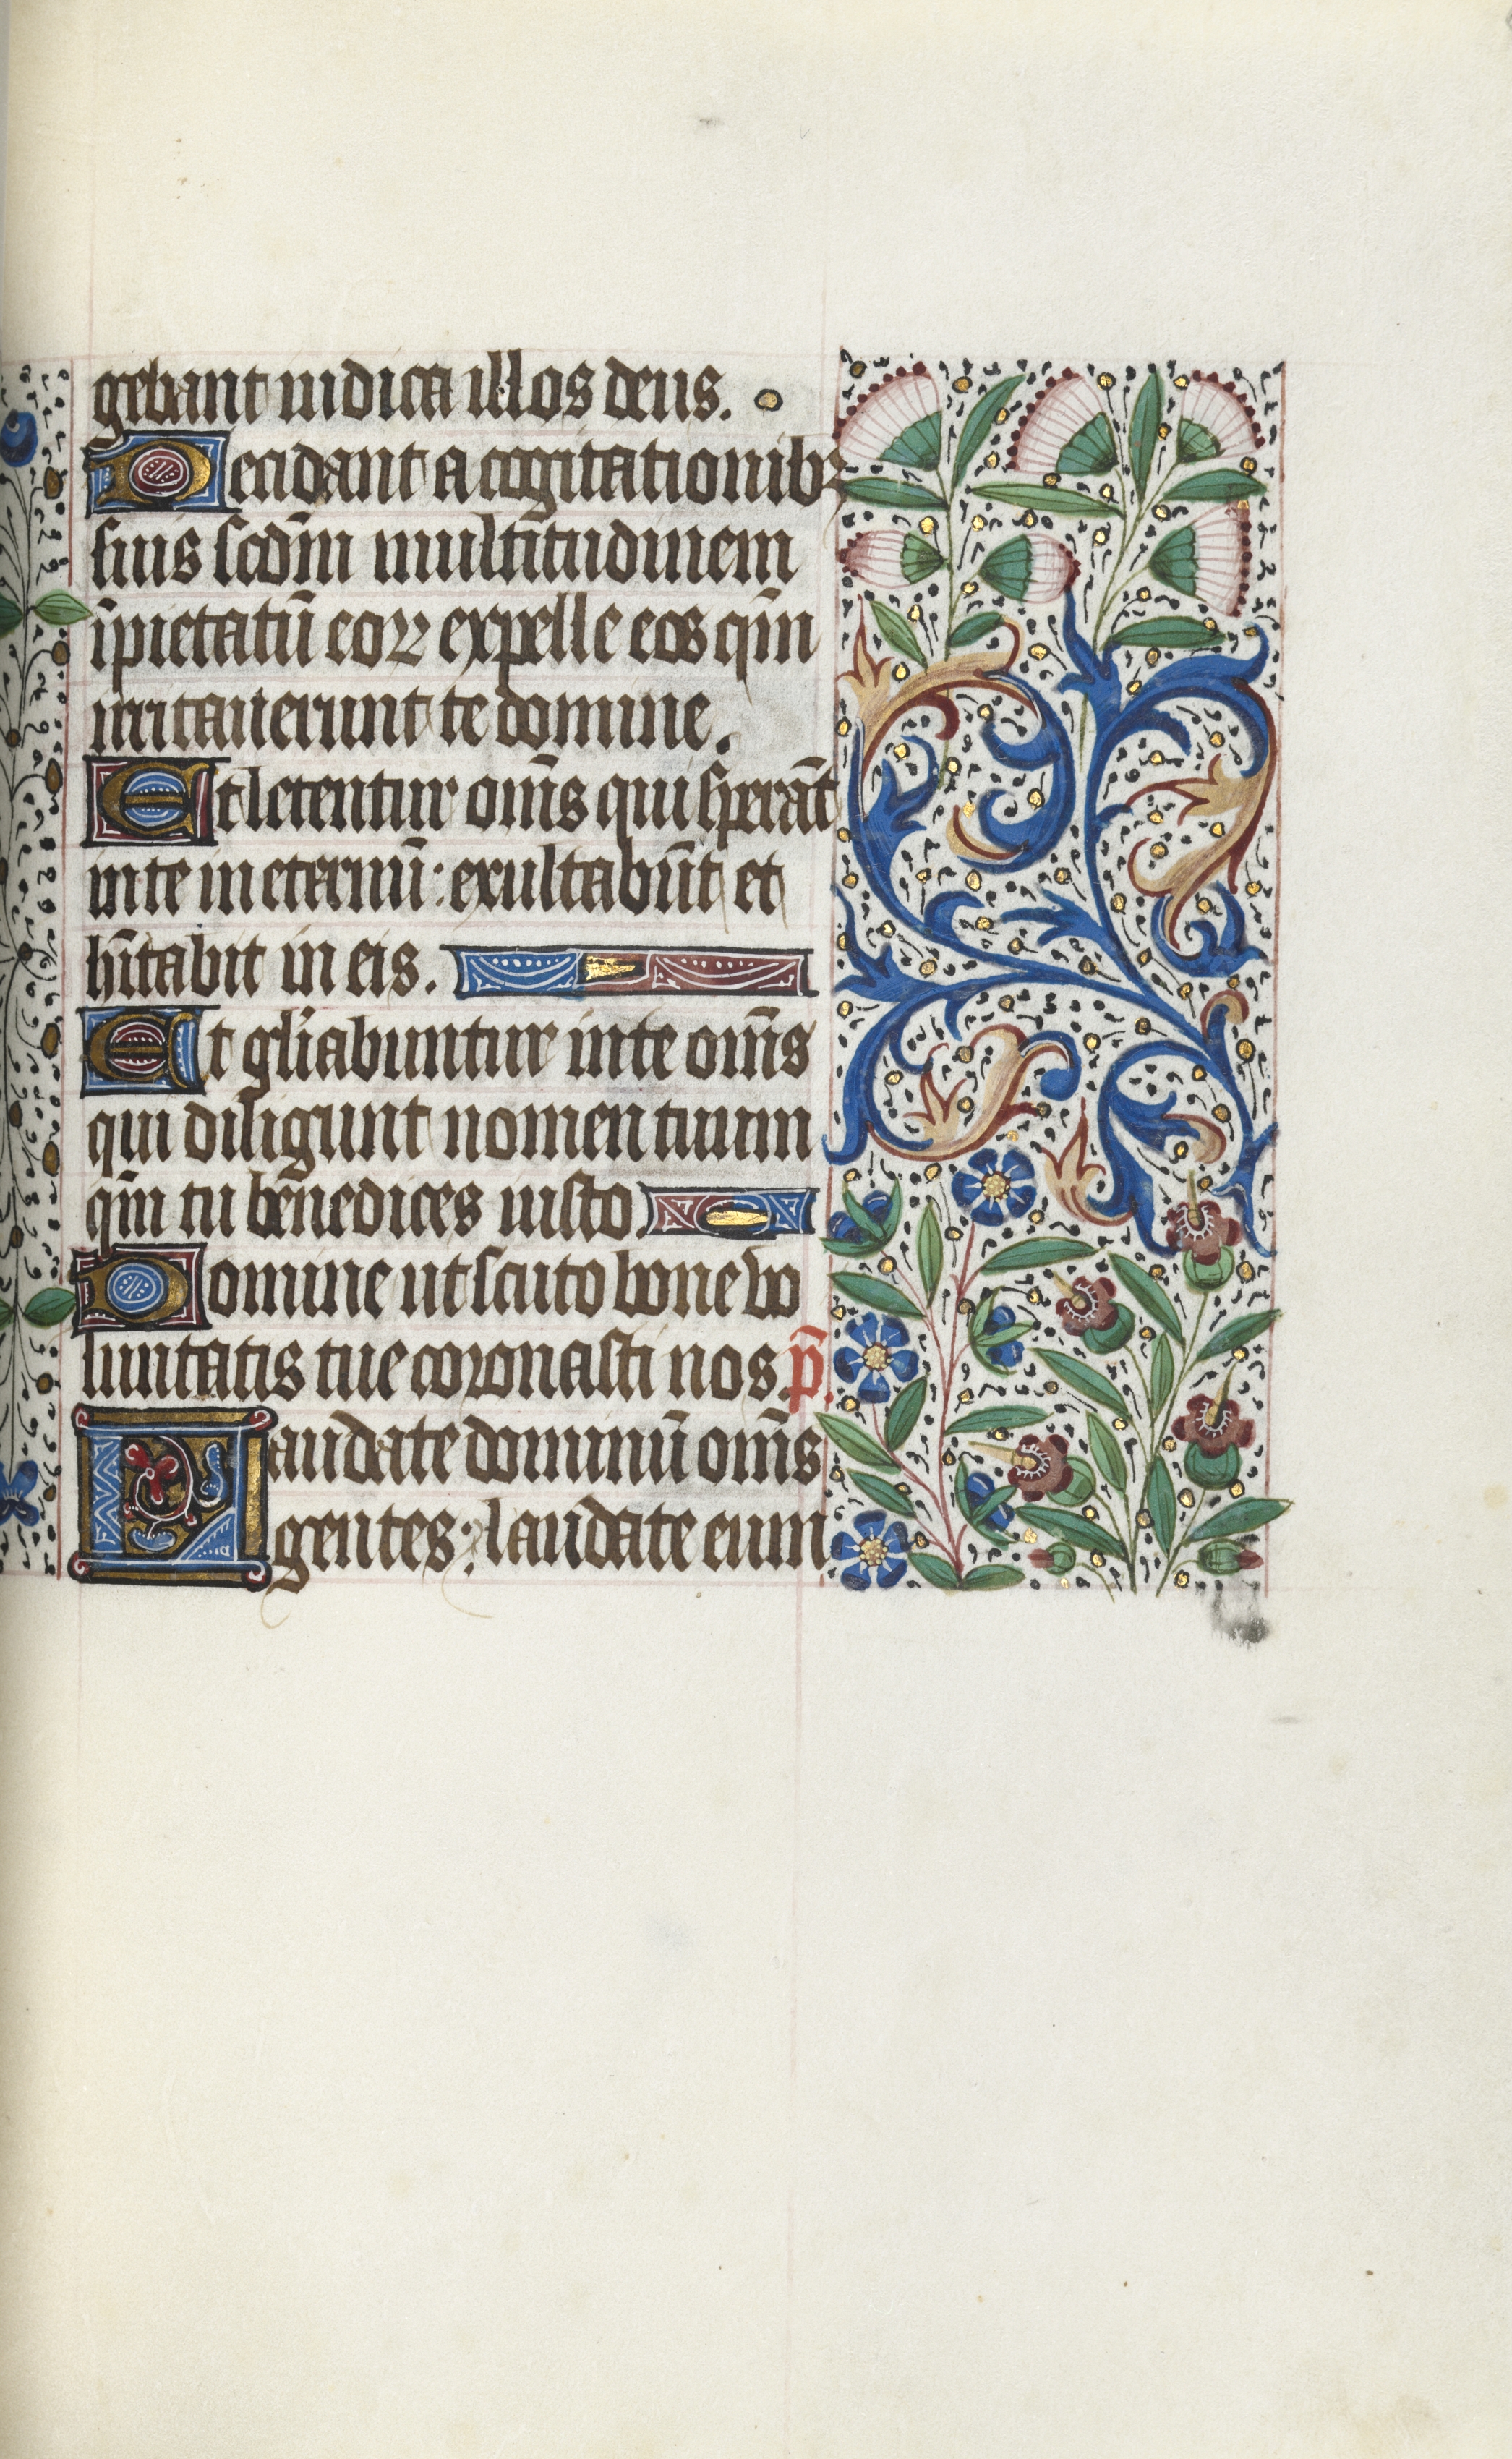 Book of Hours (Use of Rouen): fol. 60r